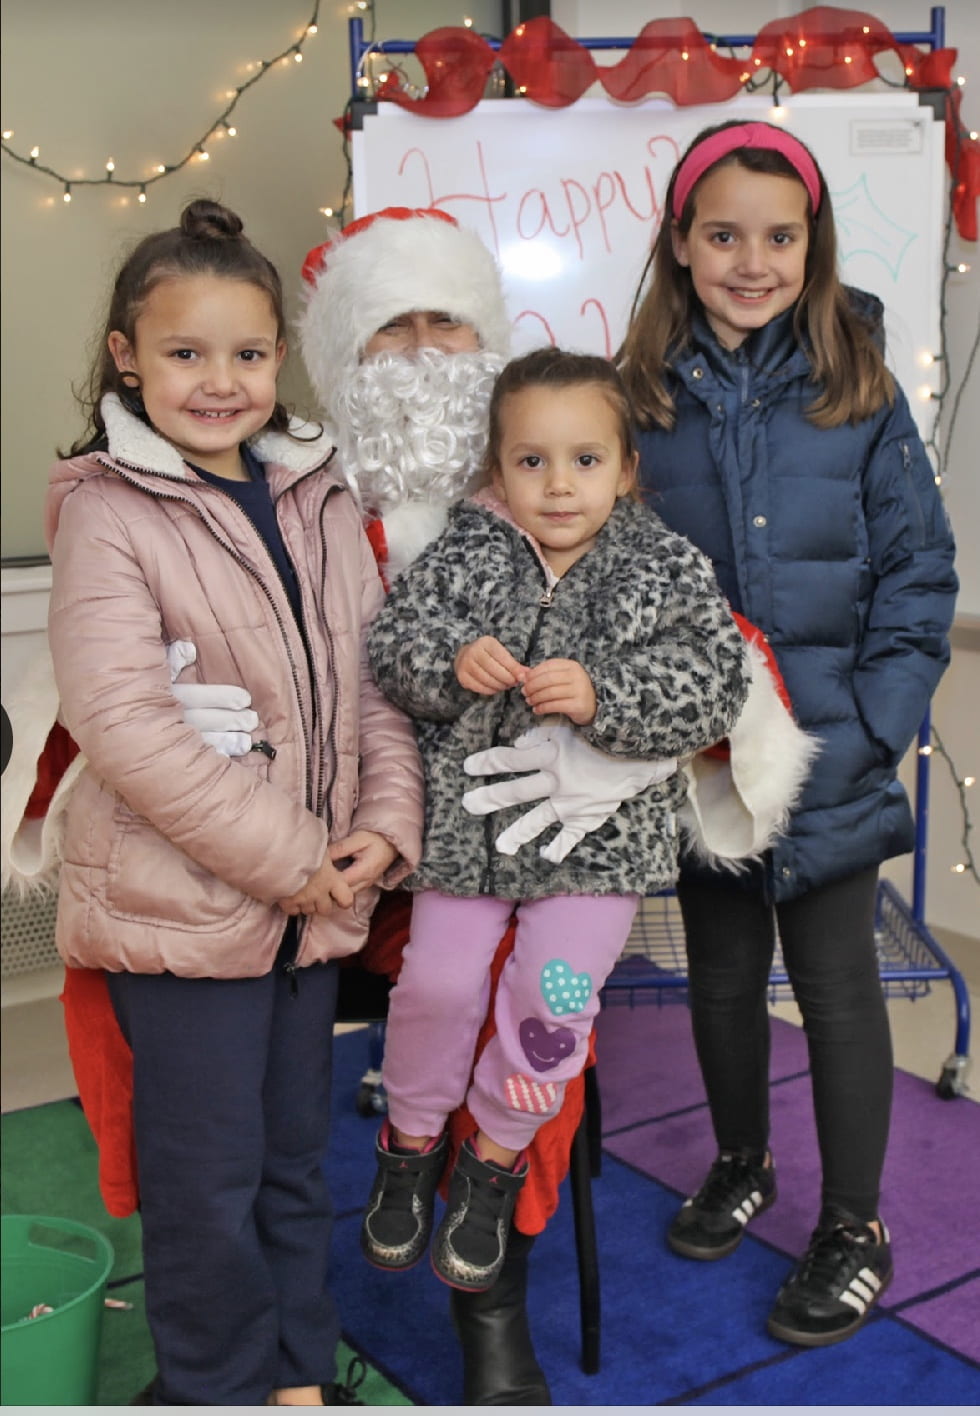 3 girls taking a picture with Santa Claus.